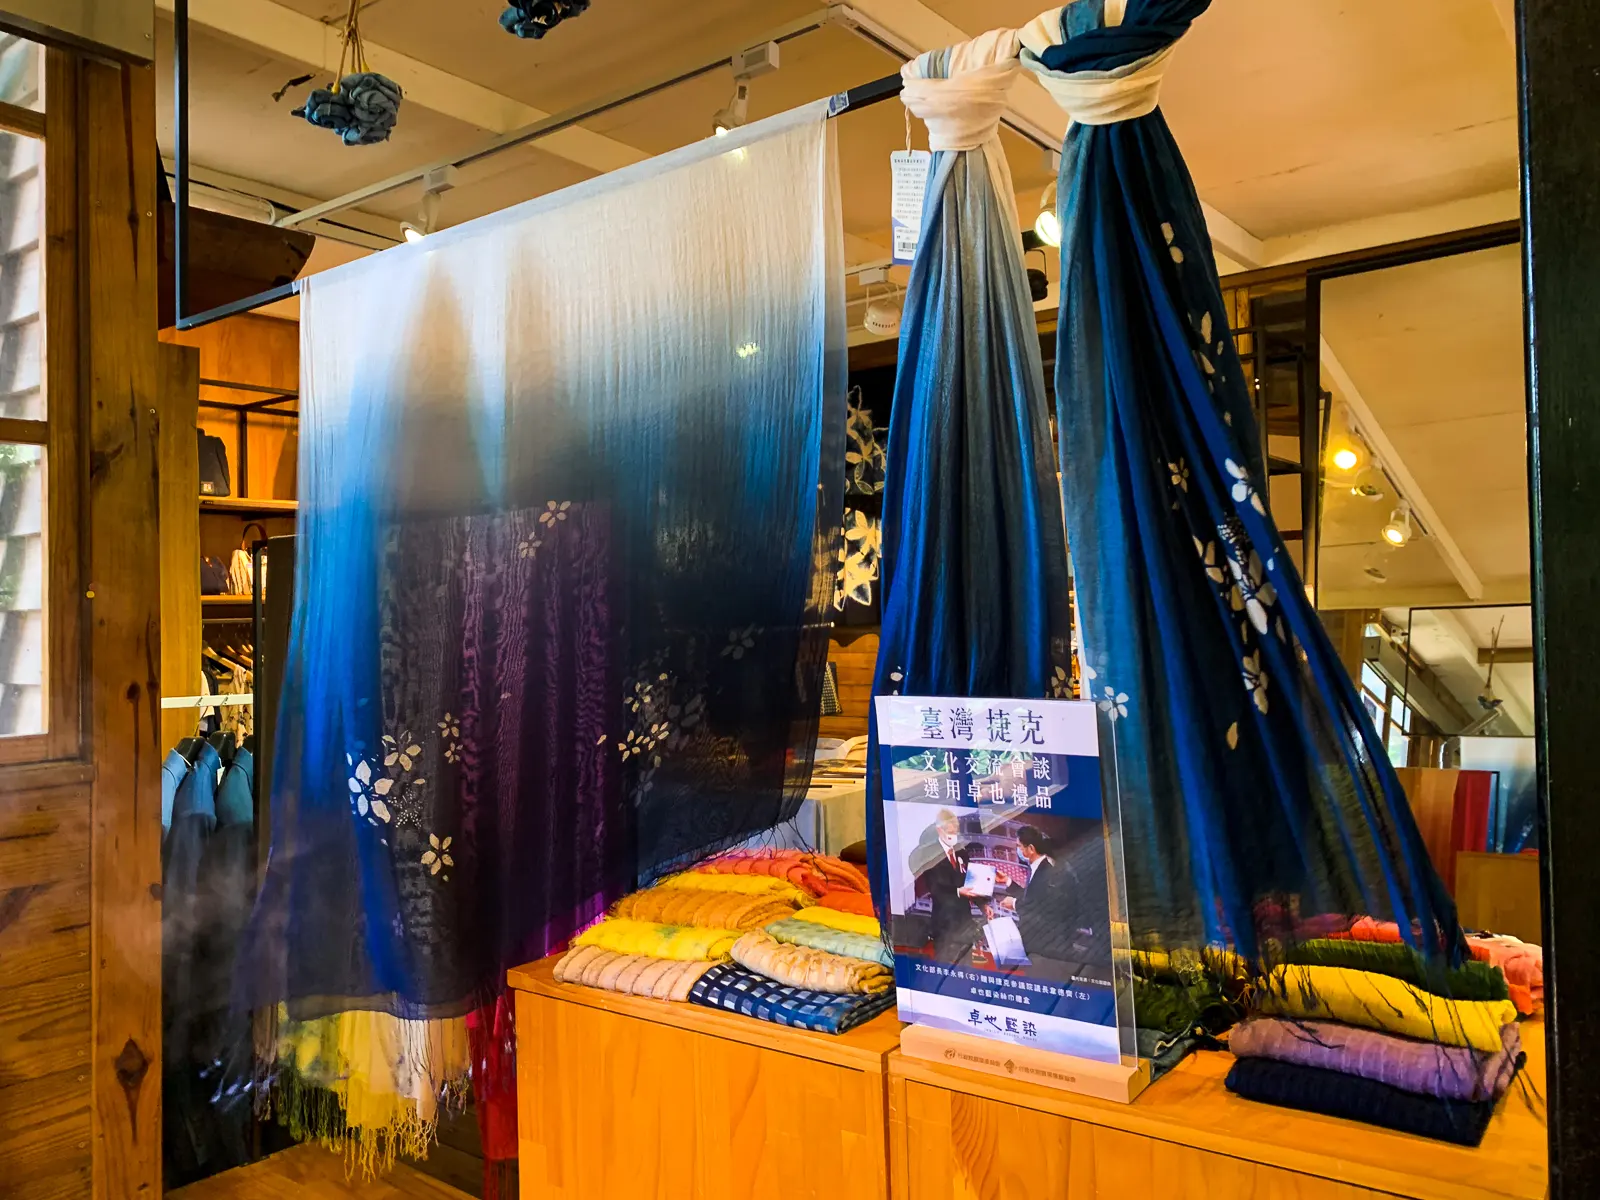 Silken indigo-dyed fabrics are on display in a shop.